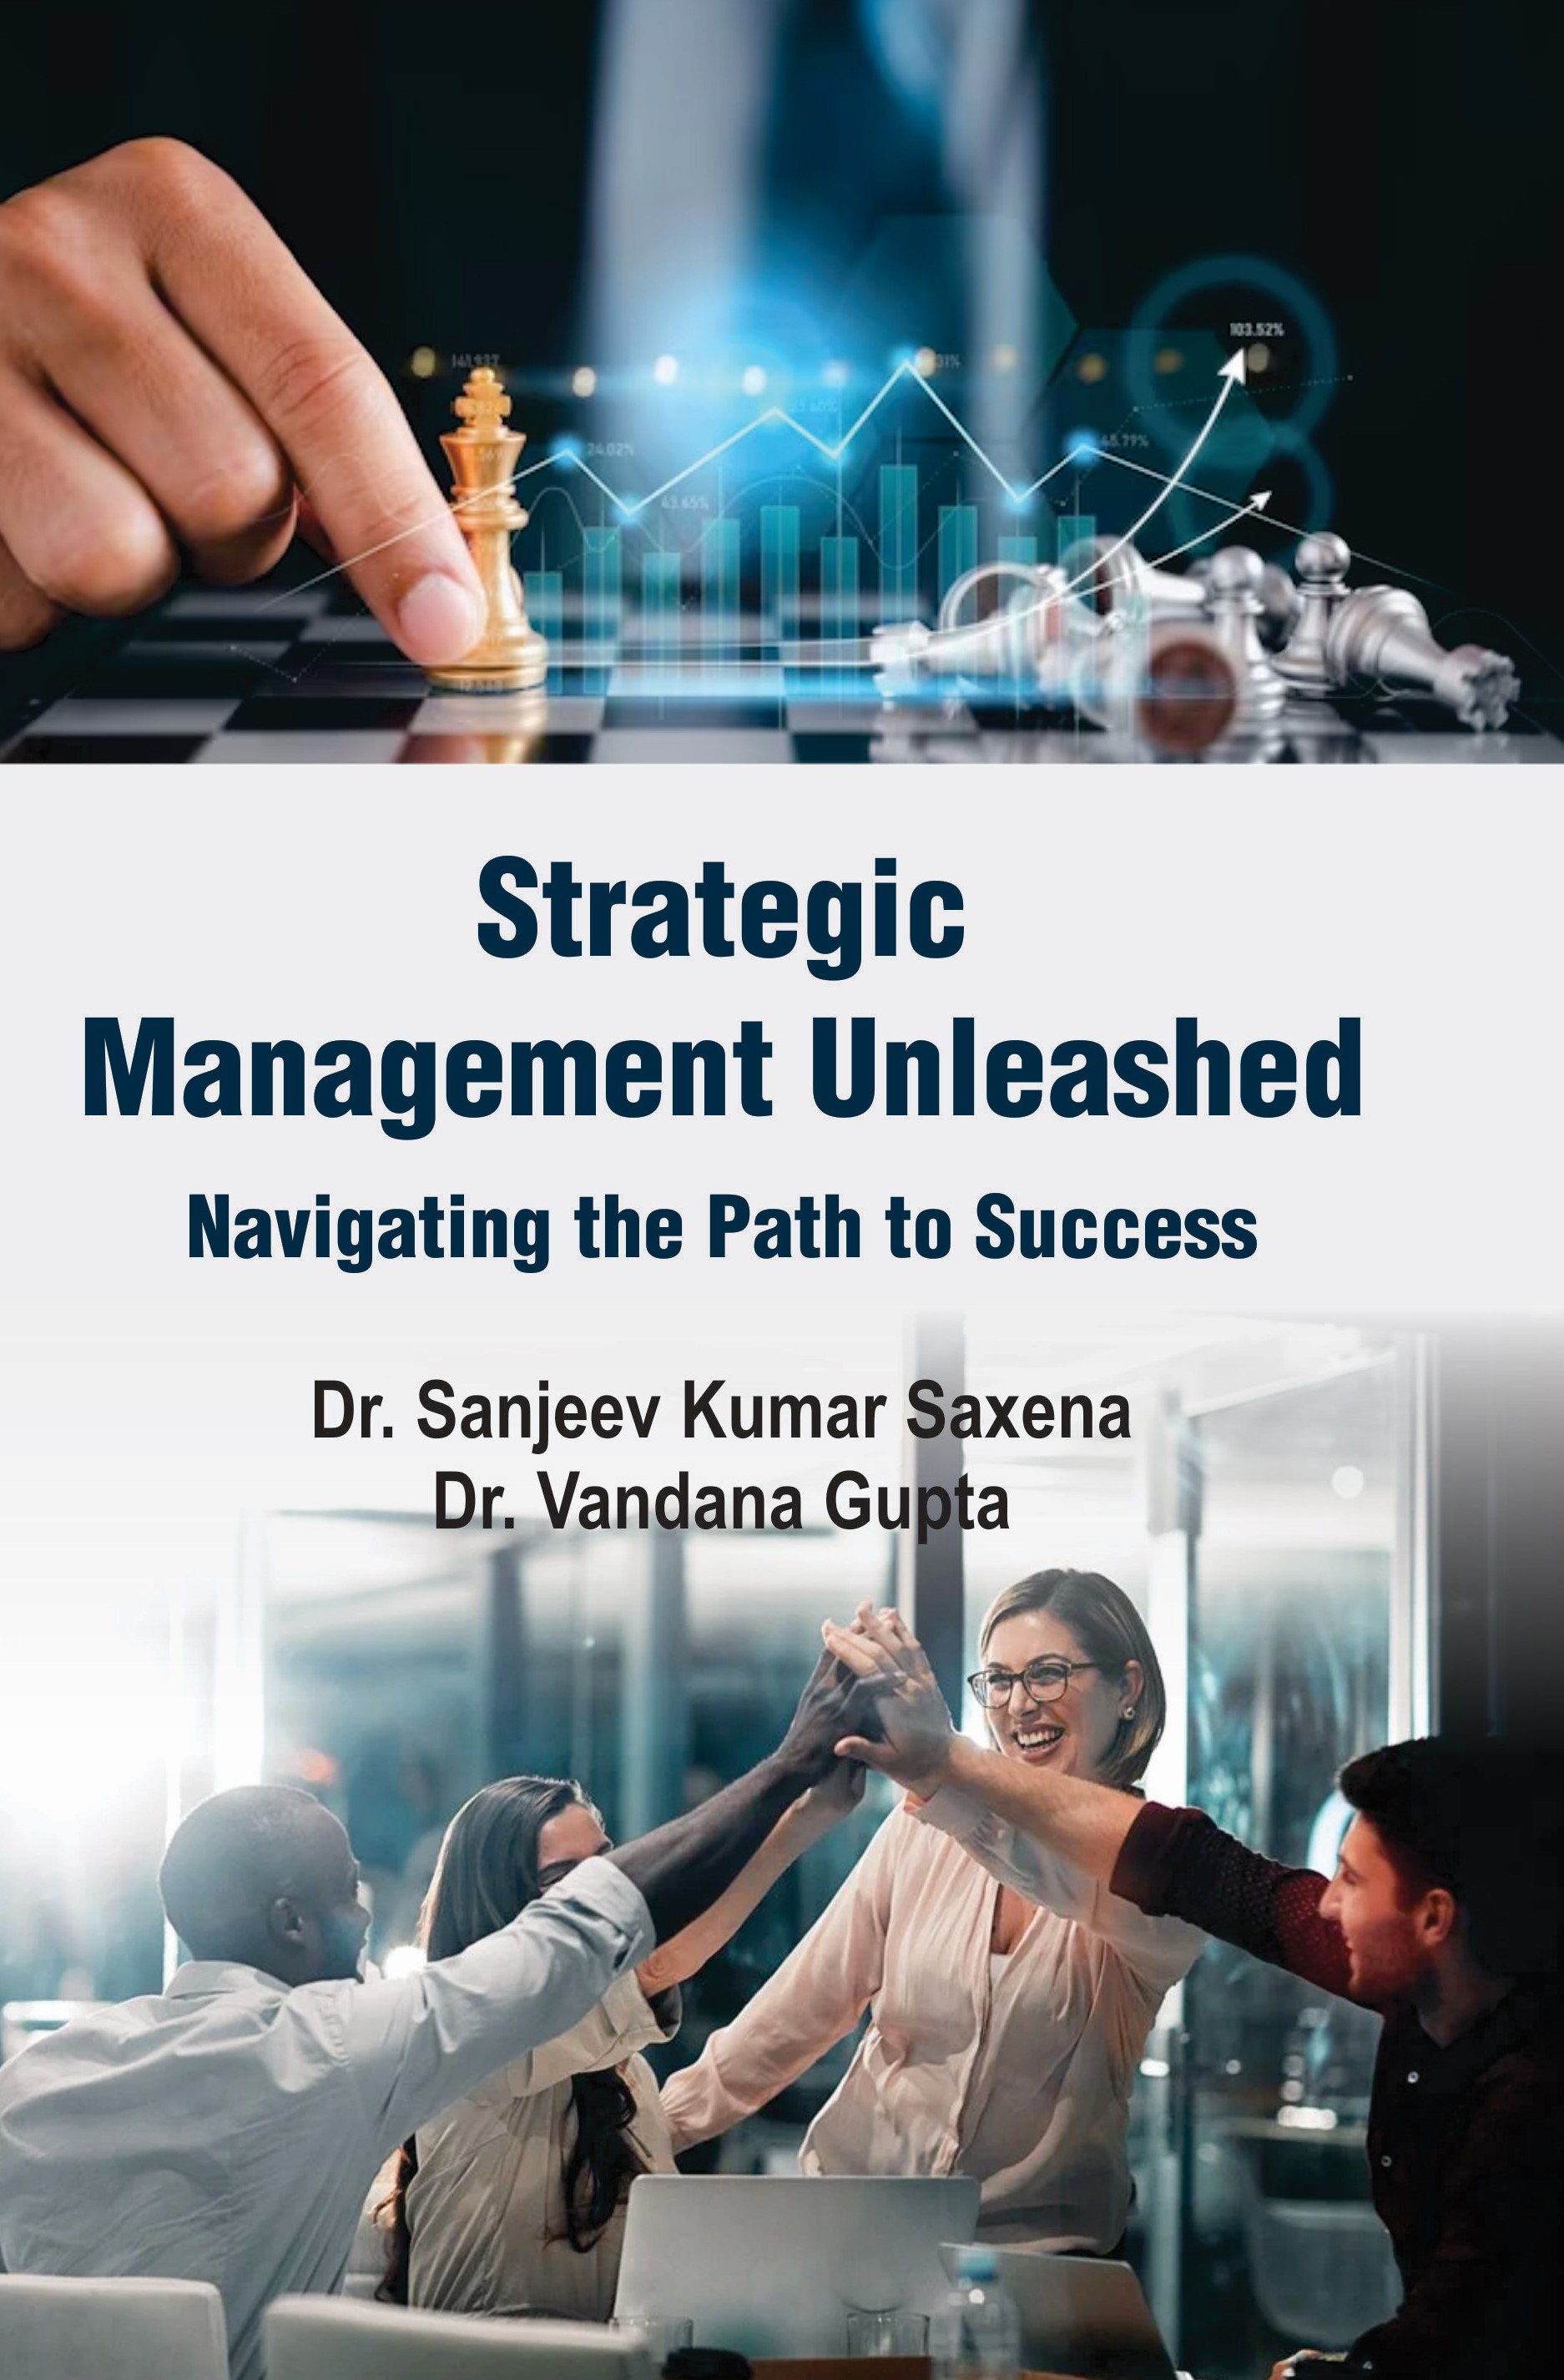 Strategic Management Unleashed: Navigating the Path to Success